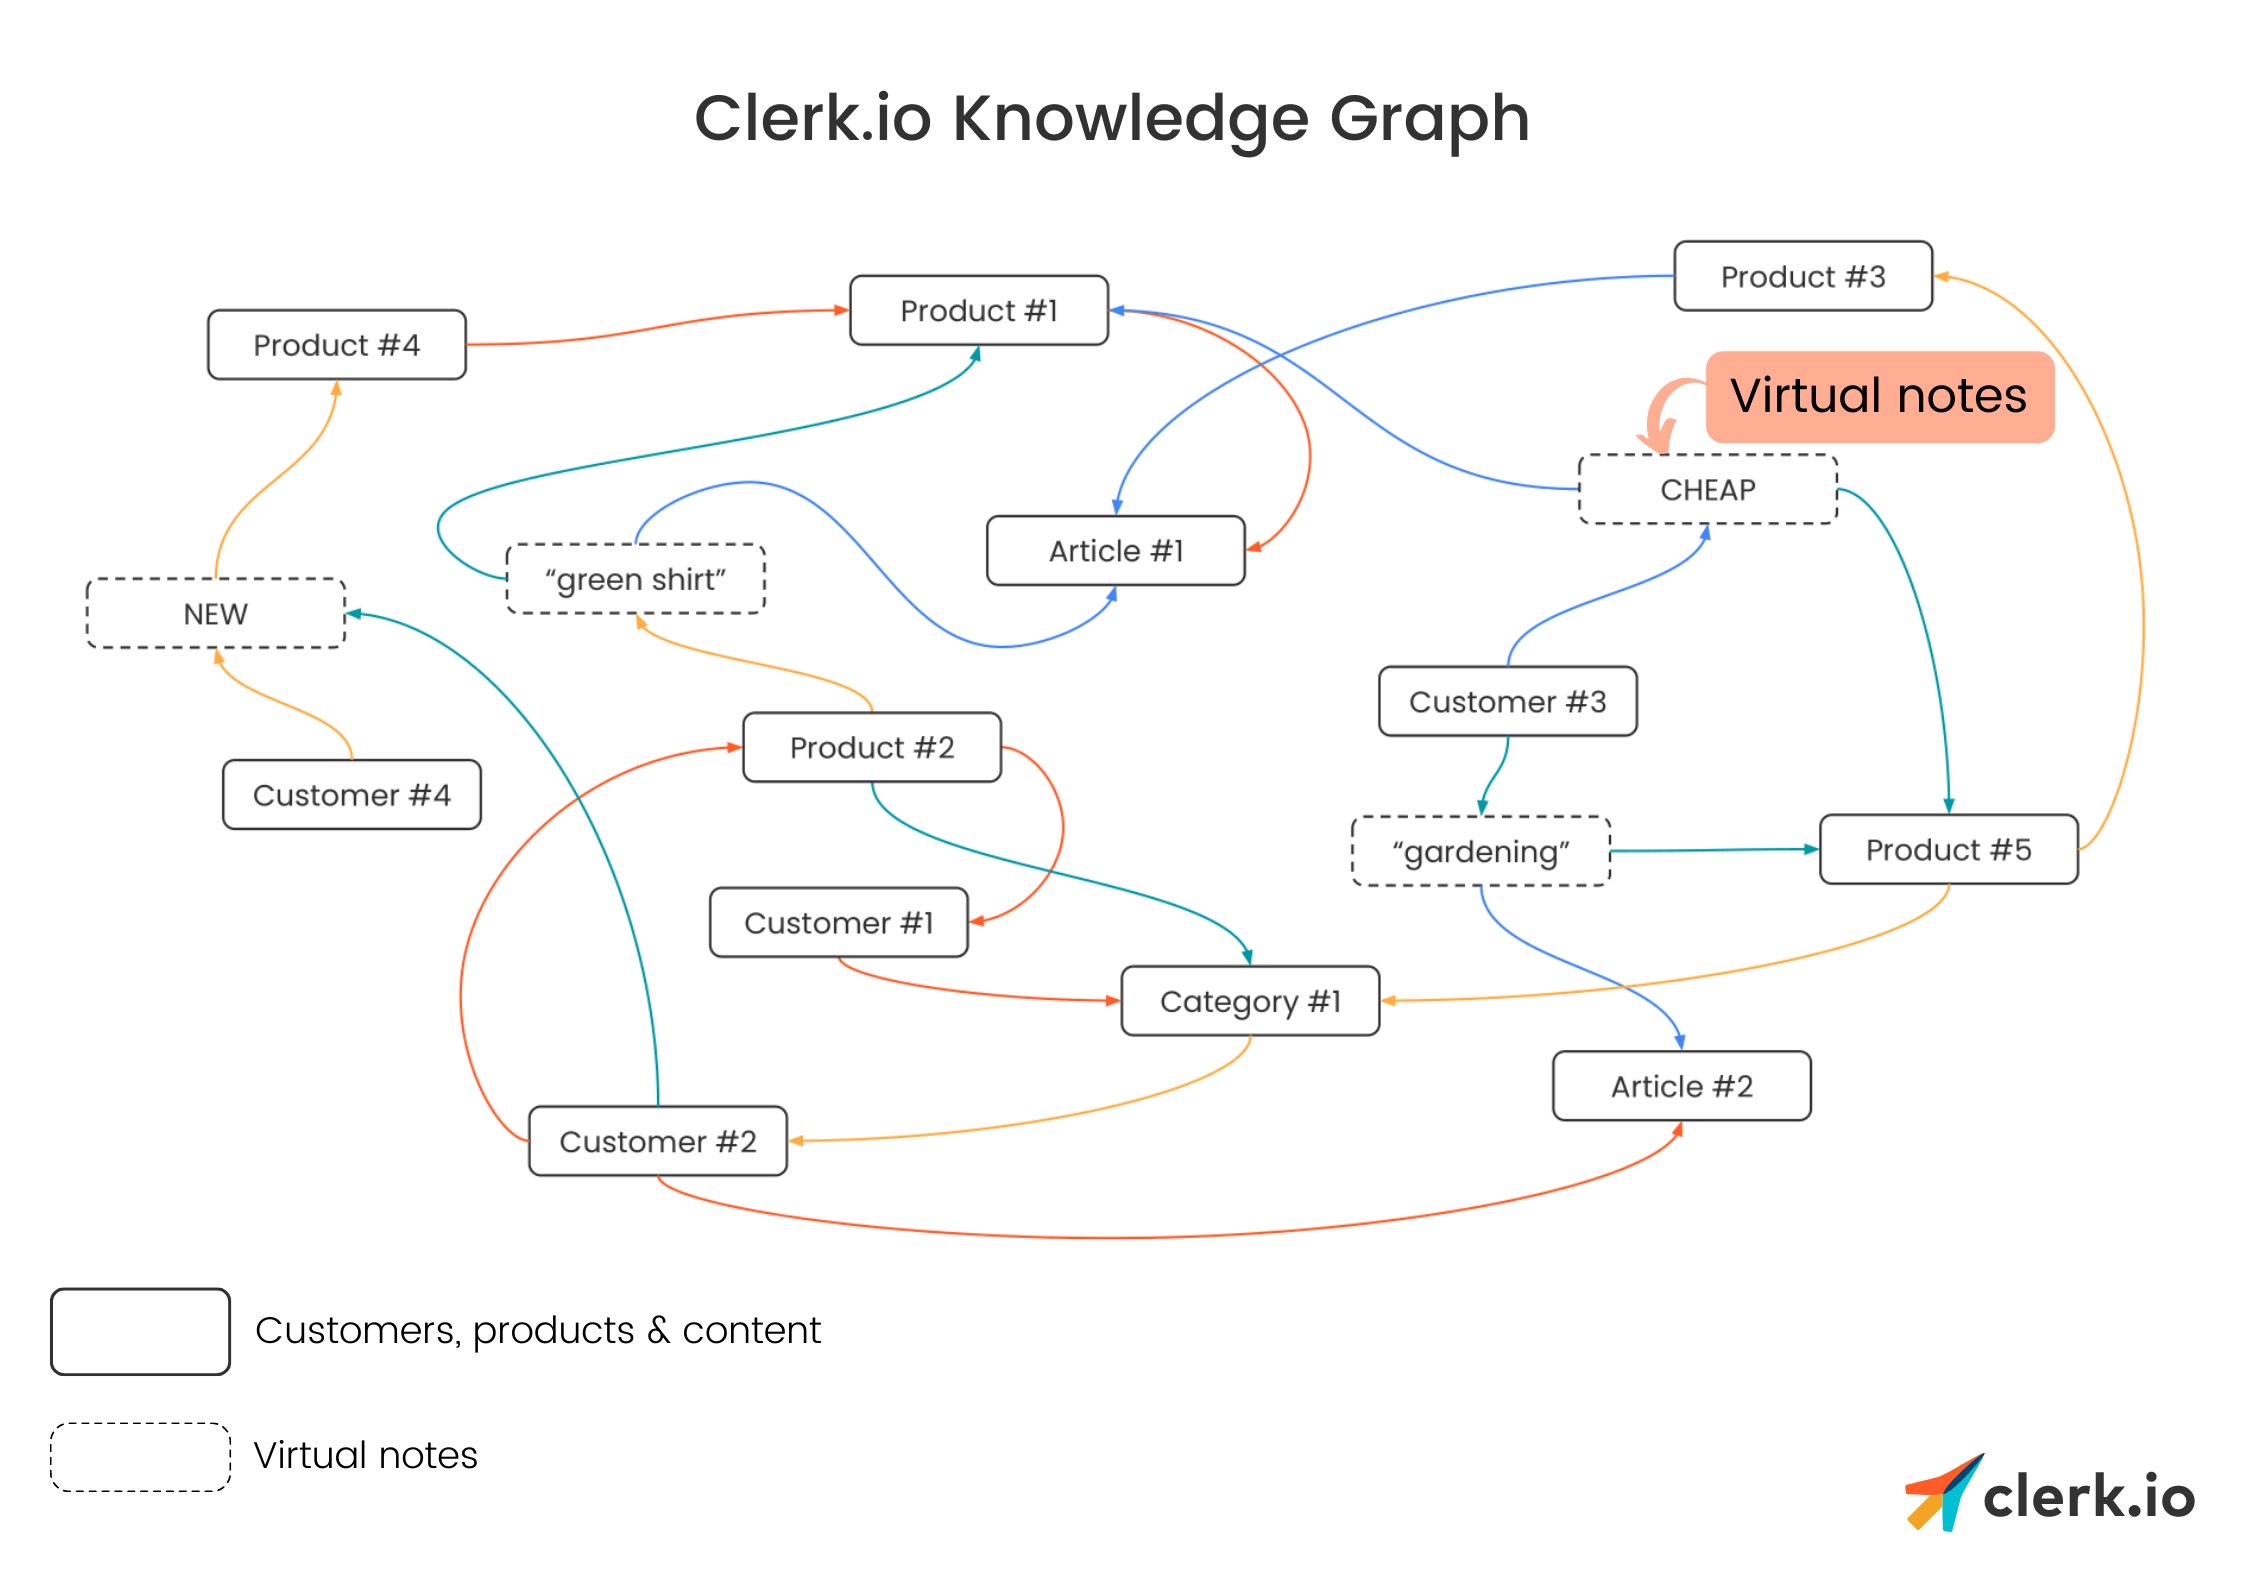 The knowledge graph